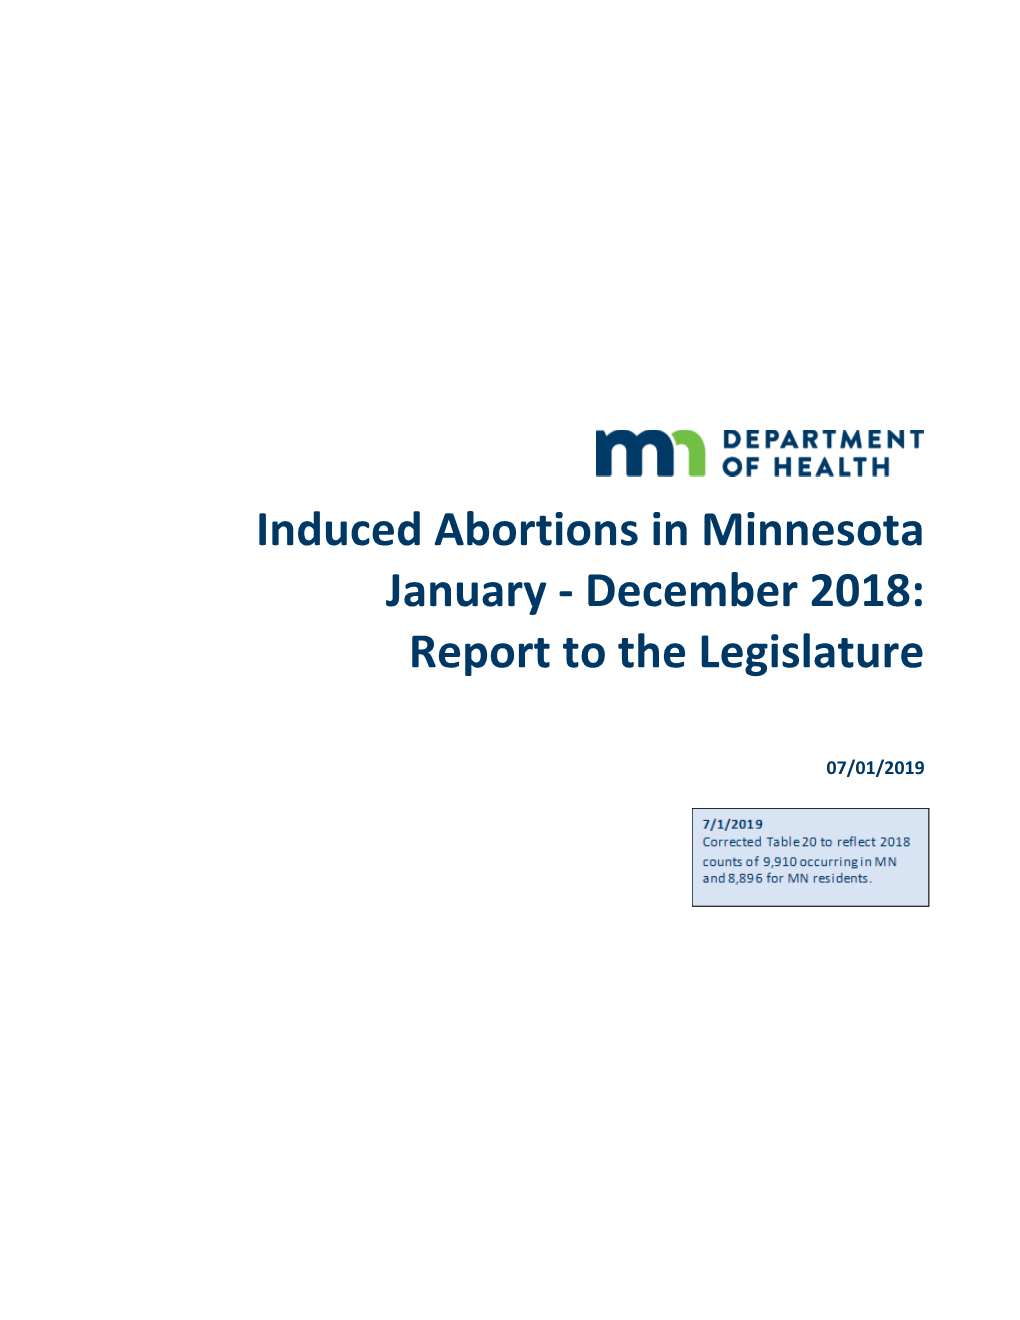 Induced Abortions in Minnesota January - December 2018: Report to the Legislature